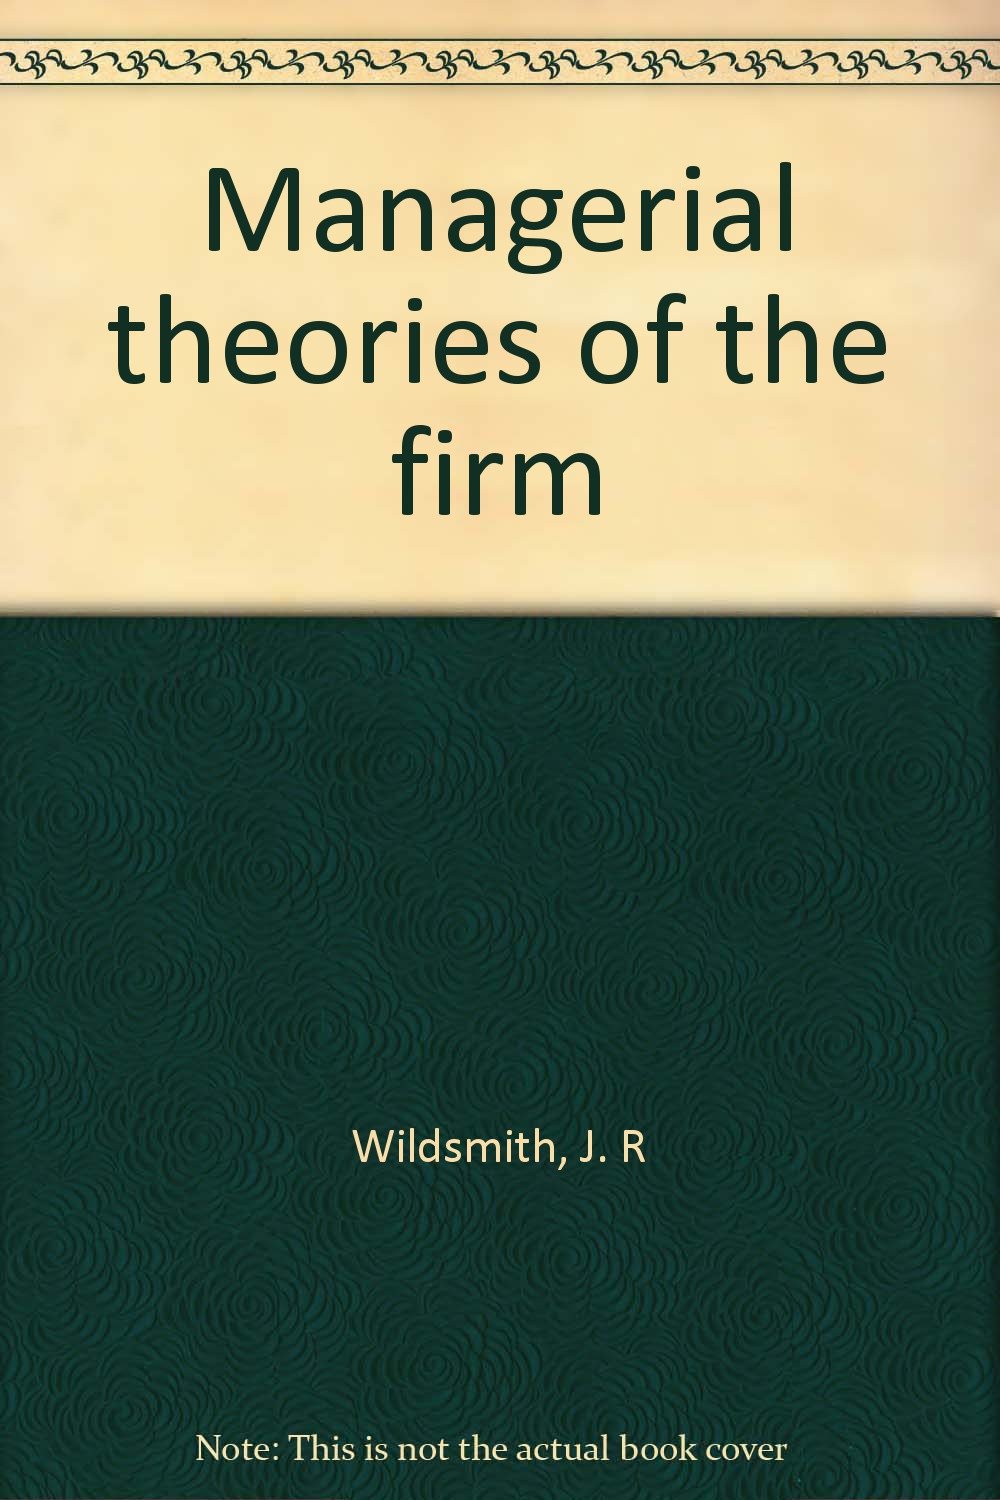 Managerial theories of the firm magazine reviews